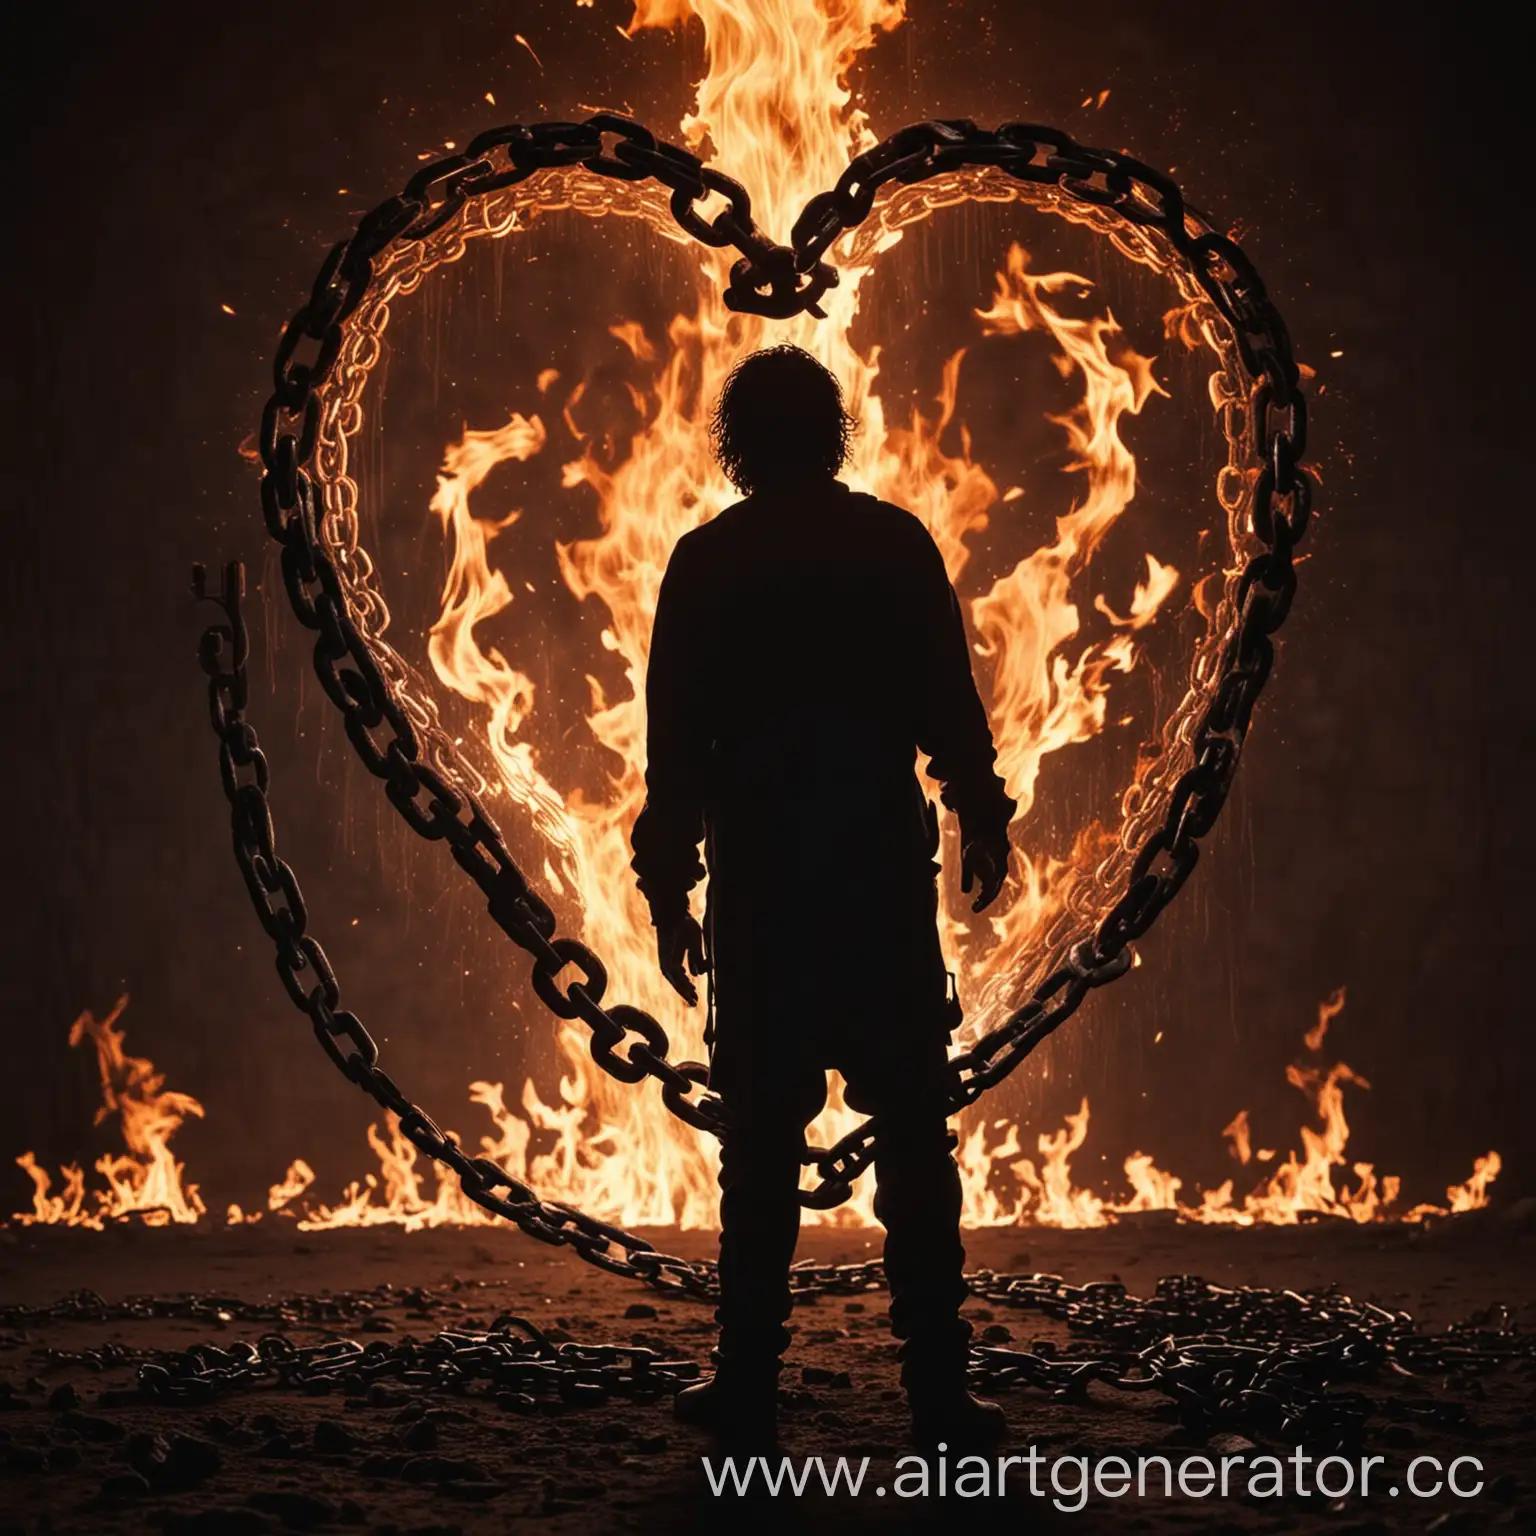 Burning-Heart-Encased-in-Chains-Fiery-Silhouette-of-a-Person-in-1080-Resolution